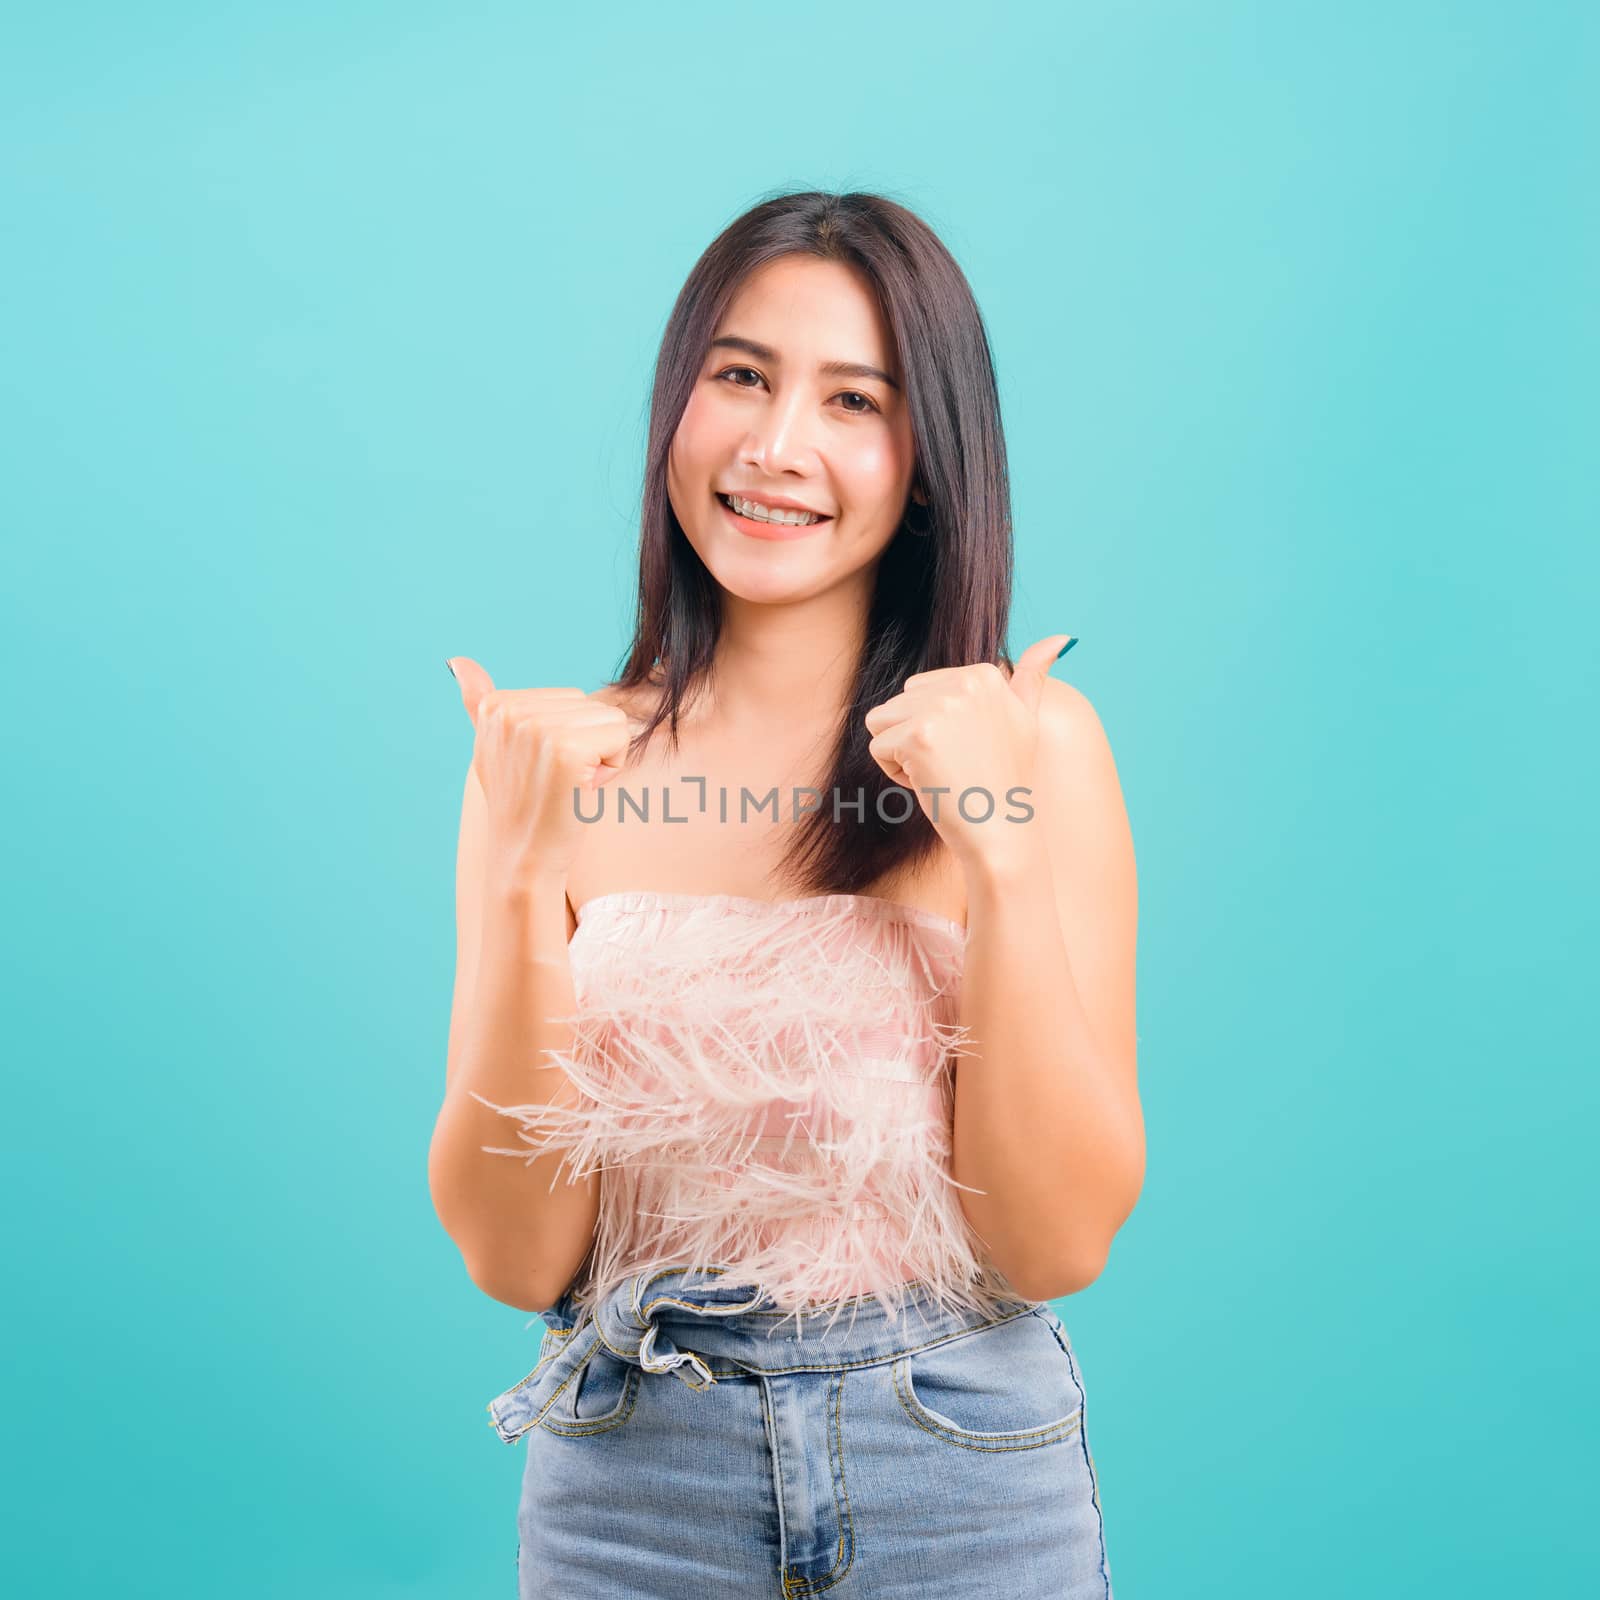 Portrait asian beautiful woman smiling showing hand showing thumbs up sign and her looking to camera on blue background, with copy space for text